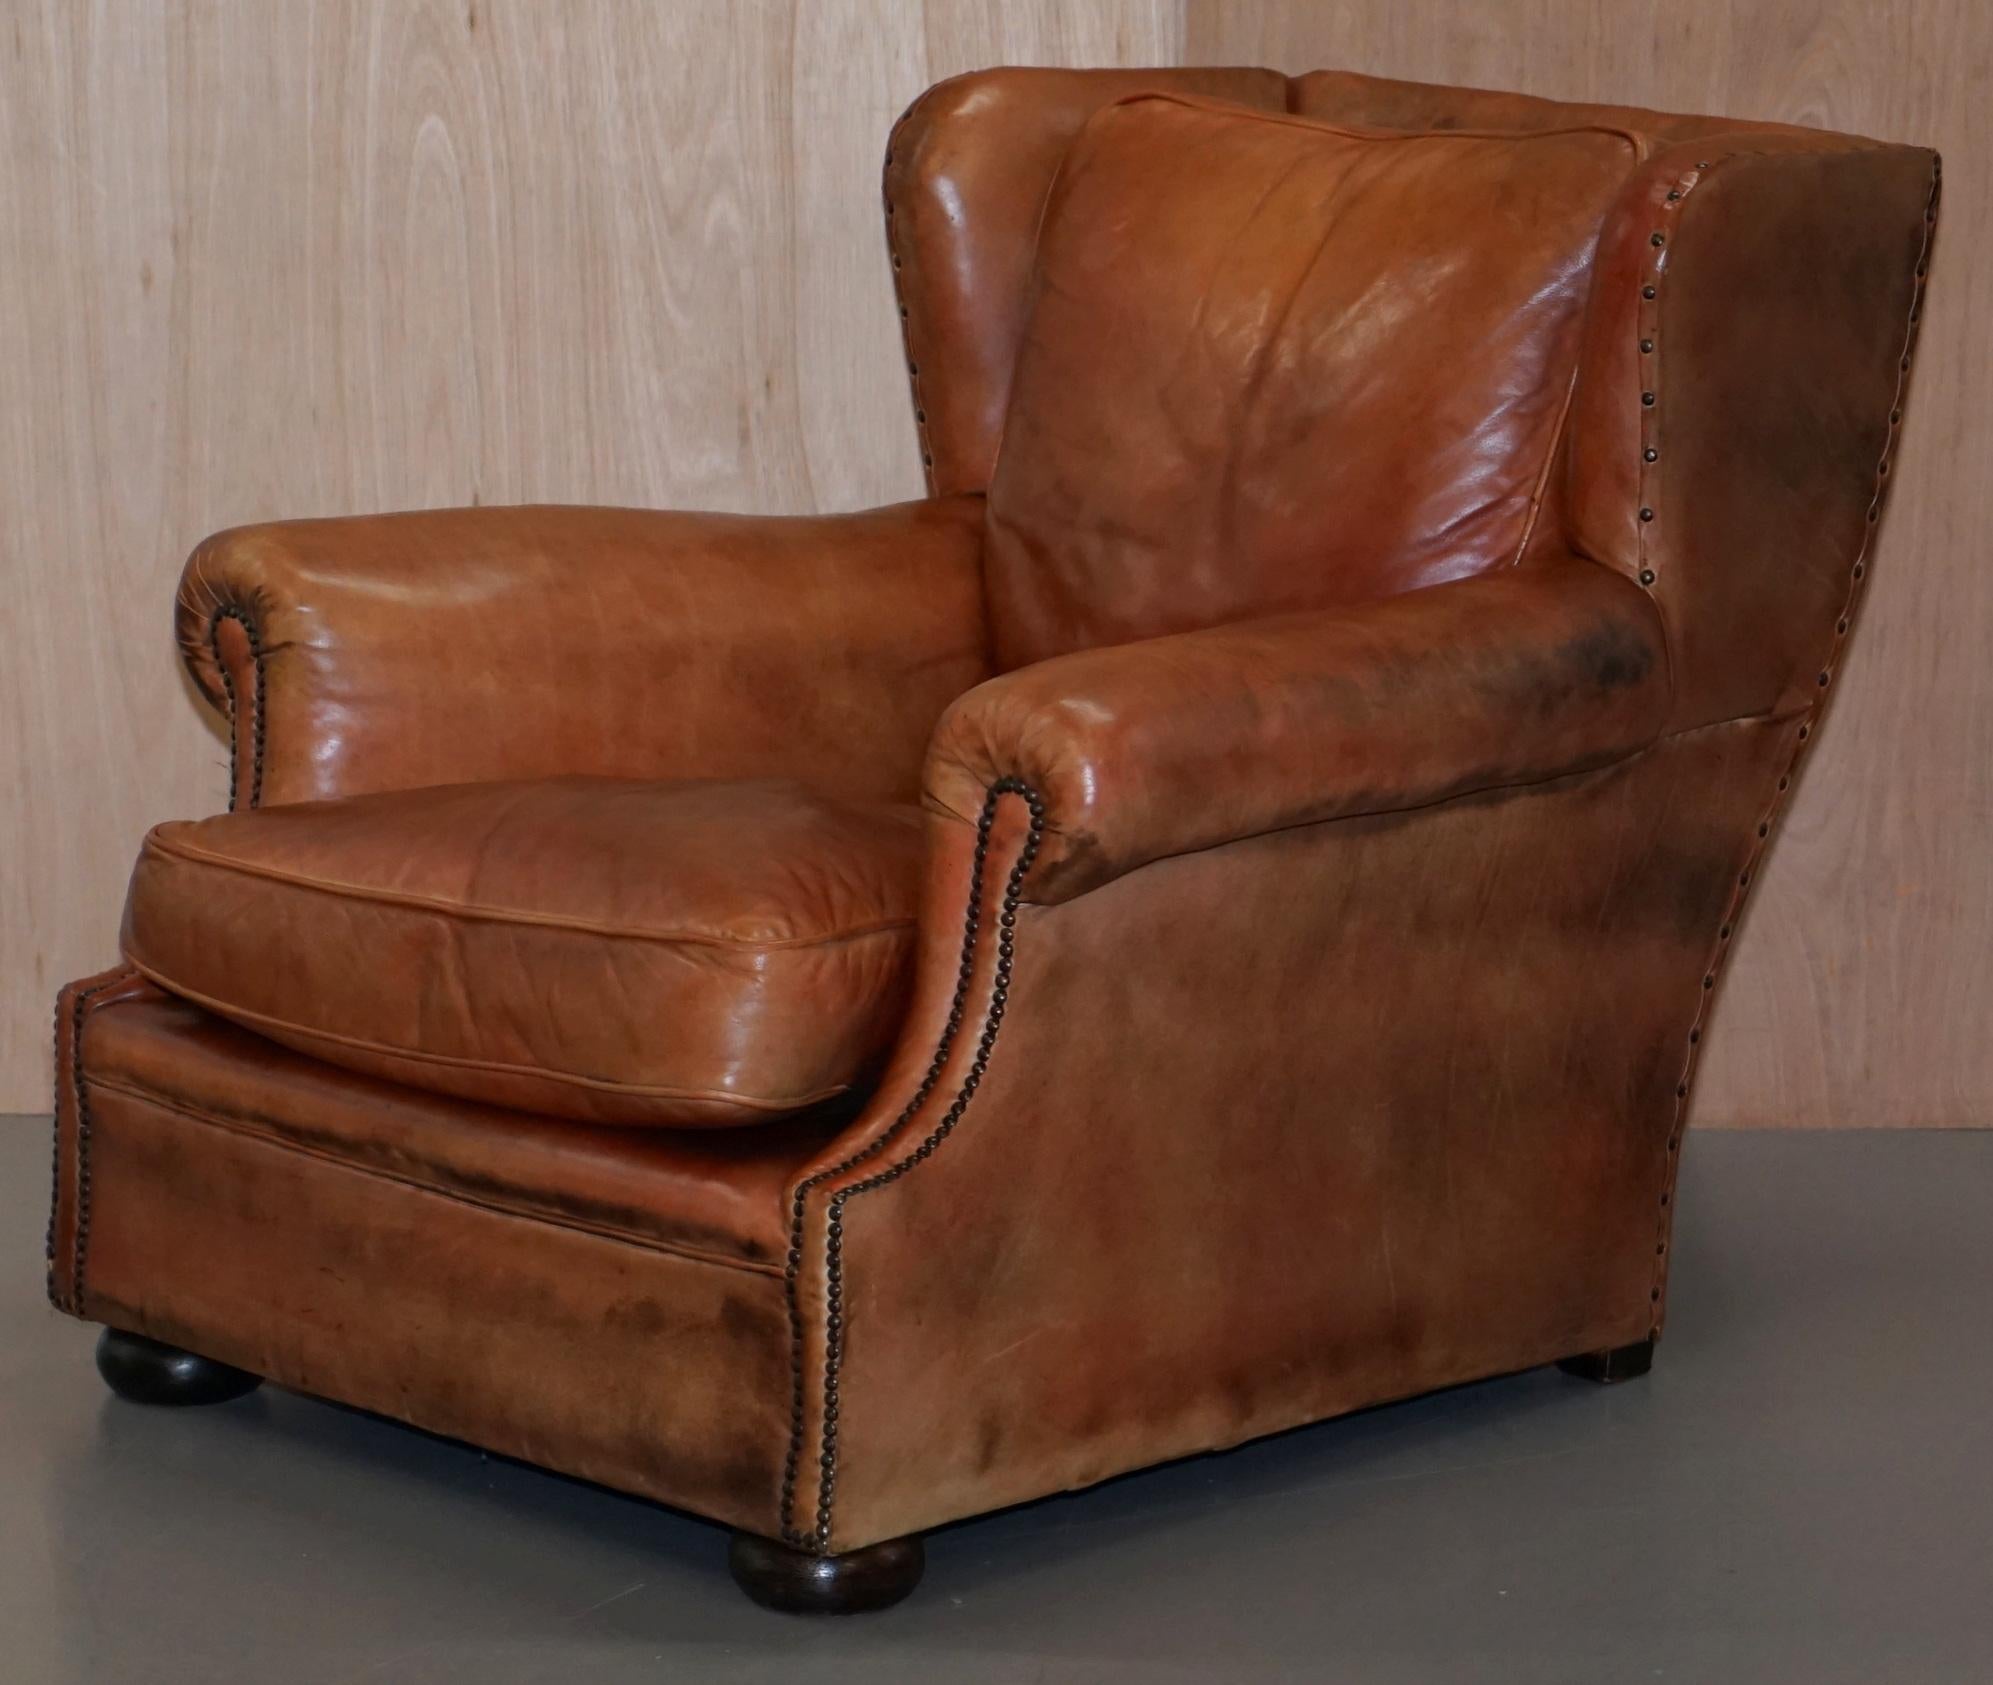 Hand-Crafted Victorian Aged Brown Leather Armchair and Matching Footstool Feather Filled Seat